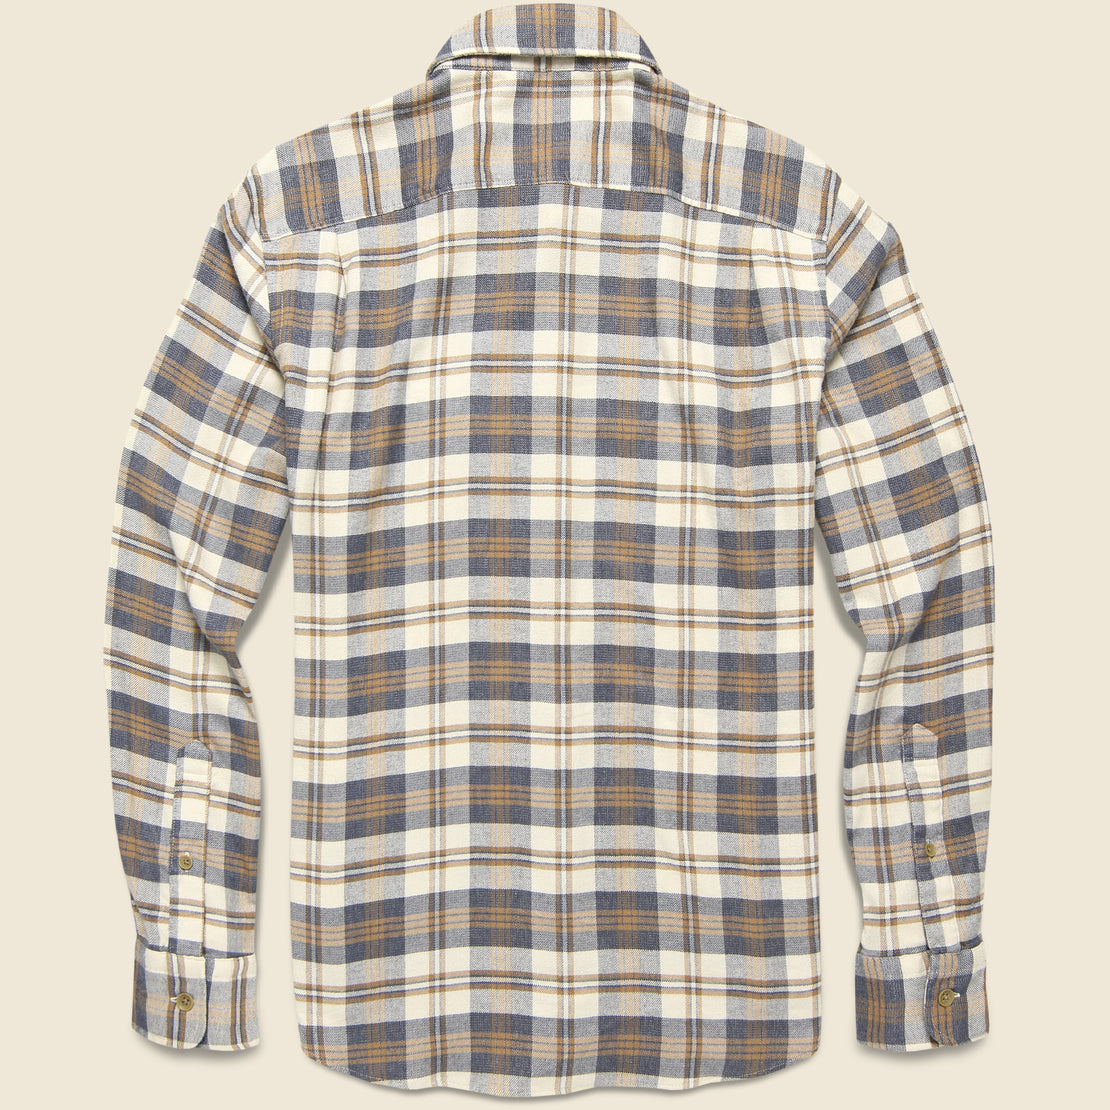 Movement Flannel - West Range - Faherty - STAG Provisions - Tops - L/S Woven - Plaid